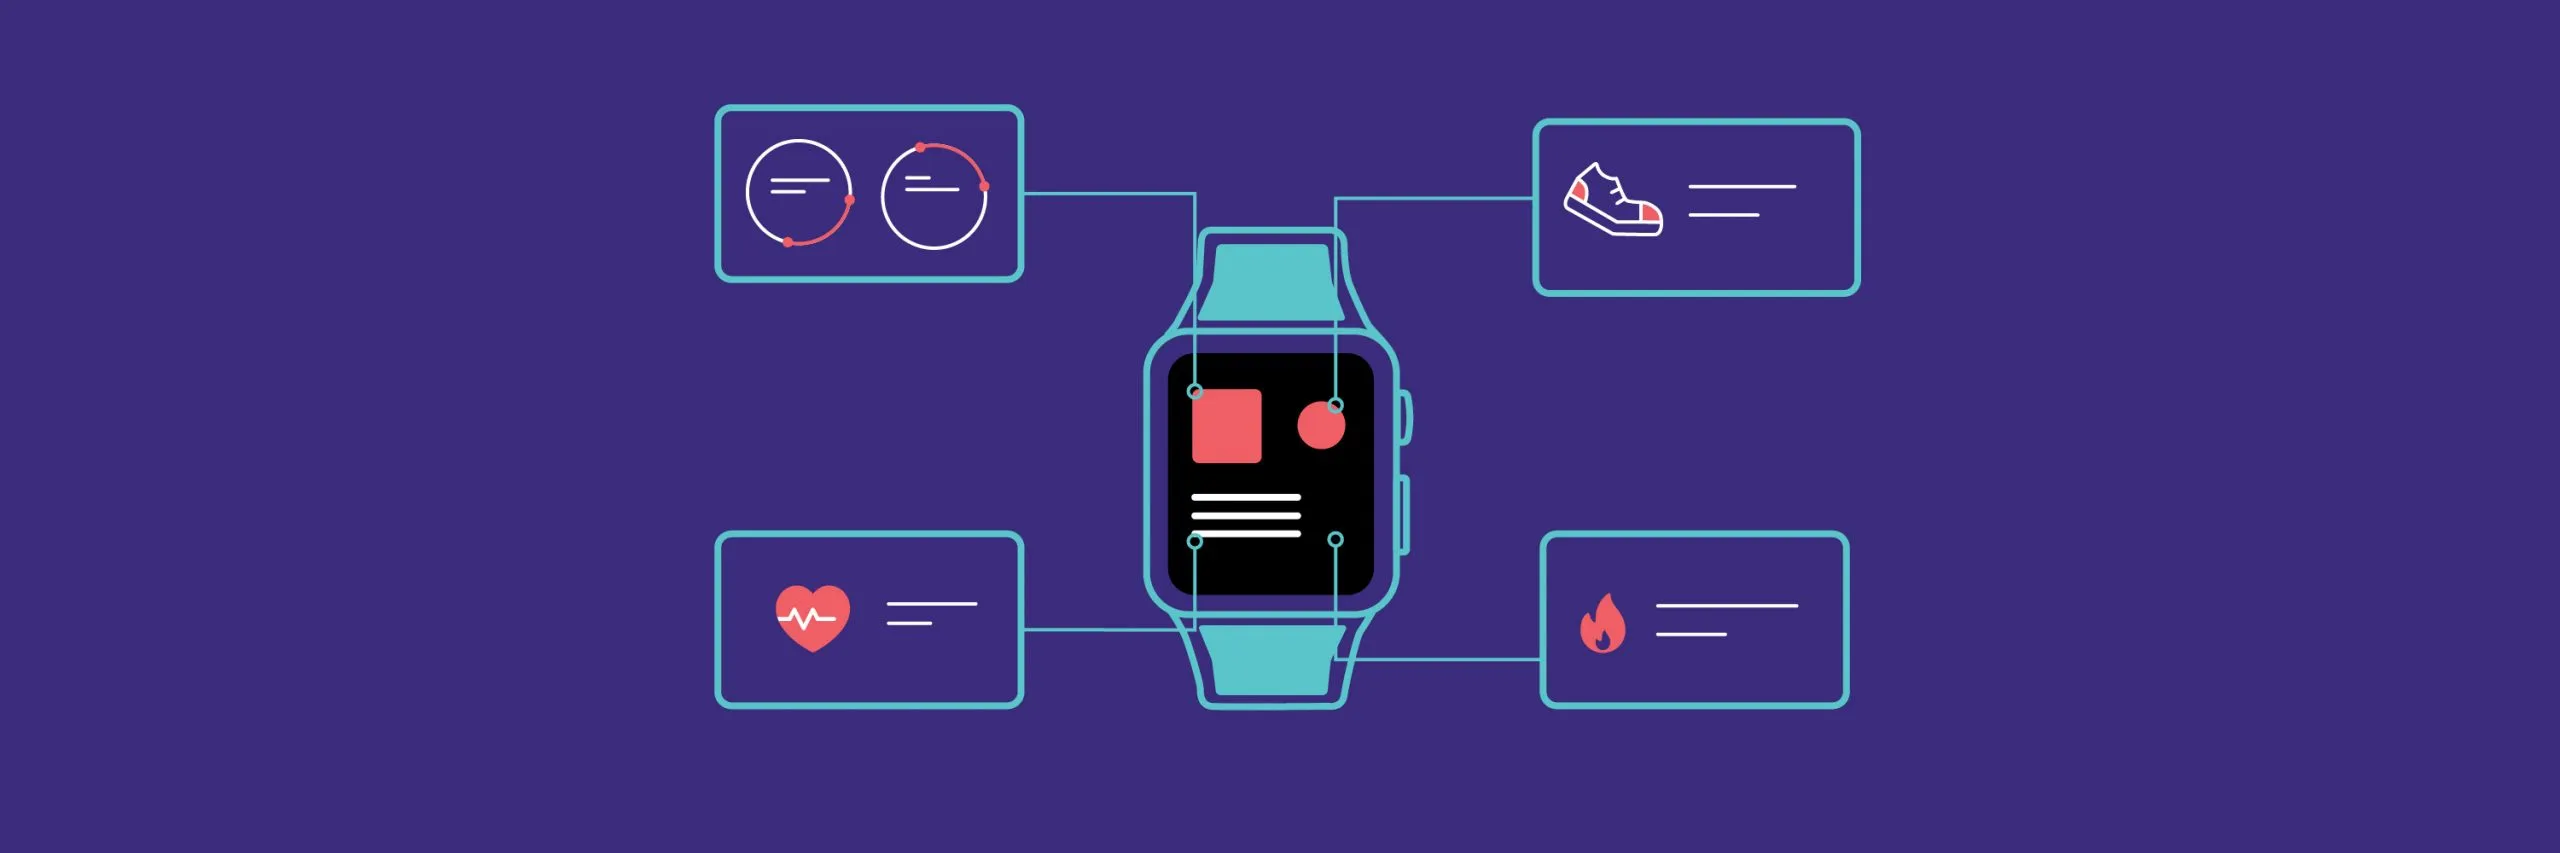 A Roadmap To Build Your Own Health & Fitness Tracking App